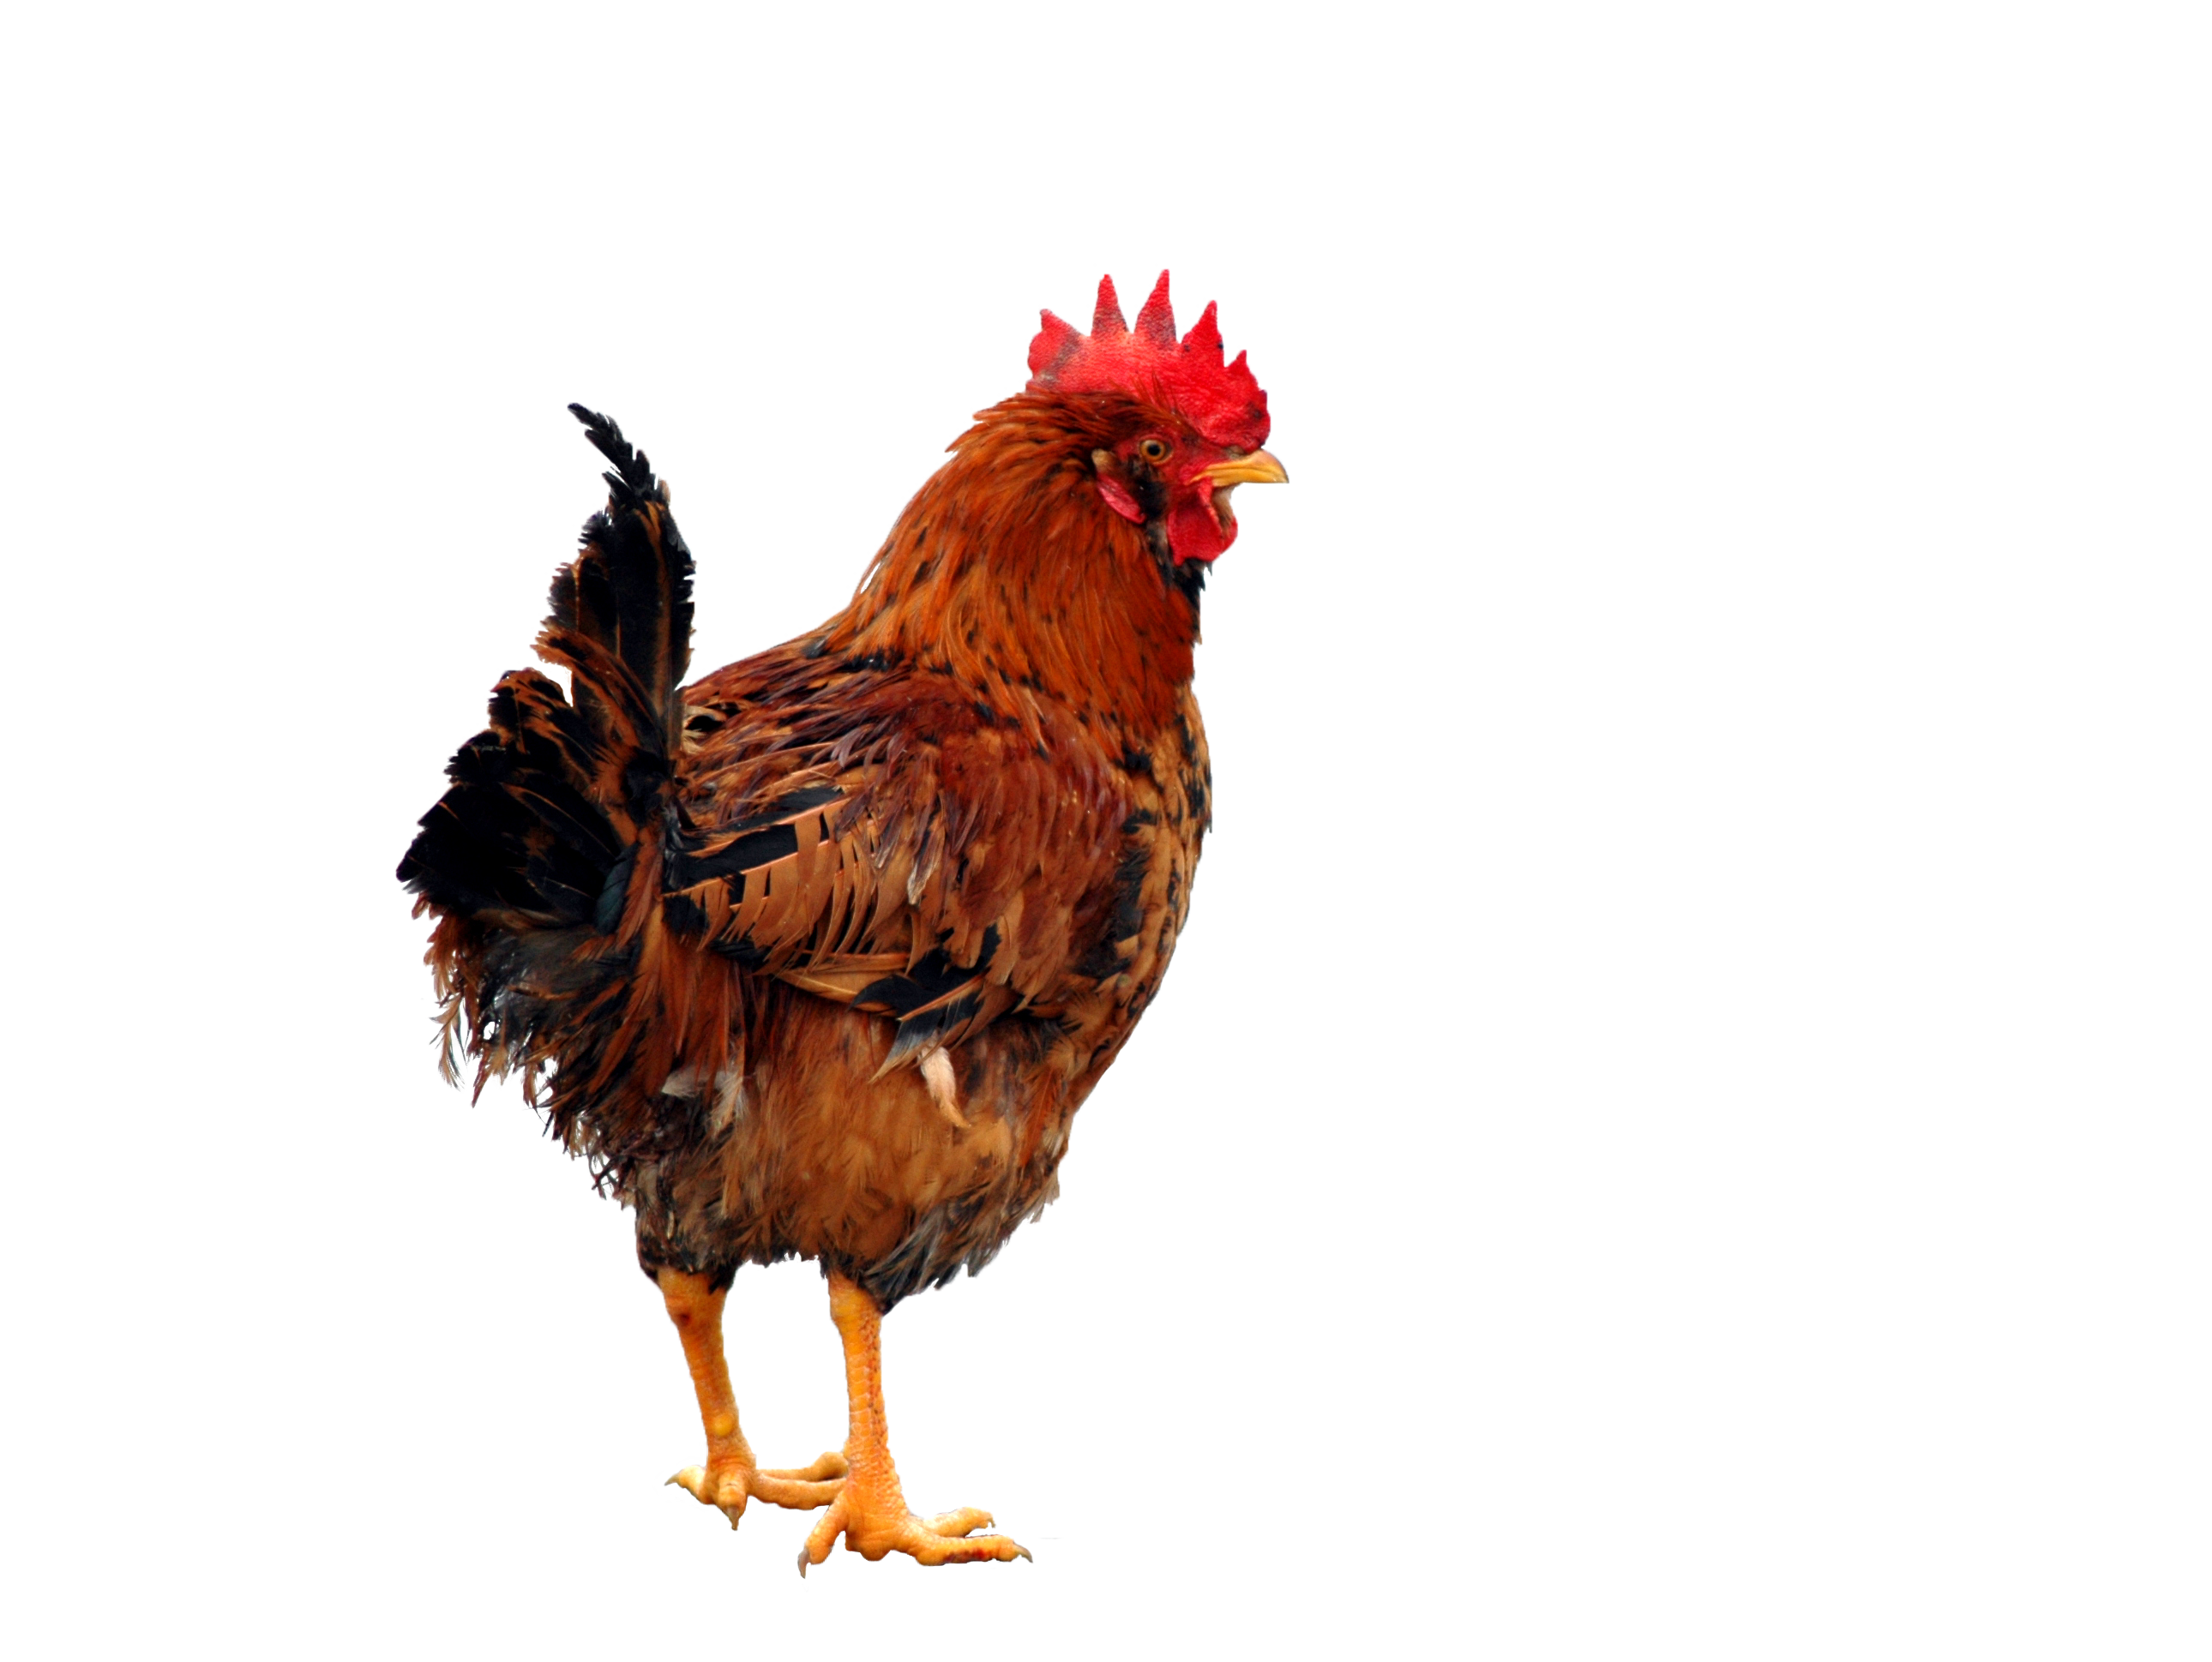 Chicken Bird PNG HD Images